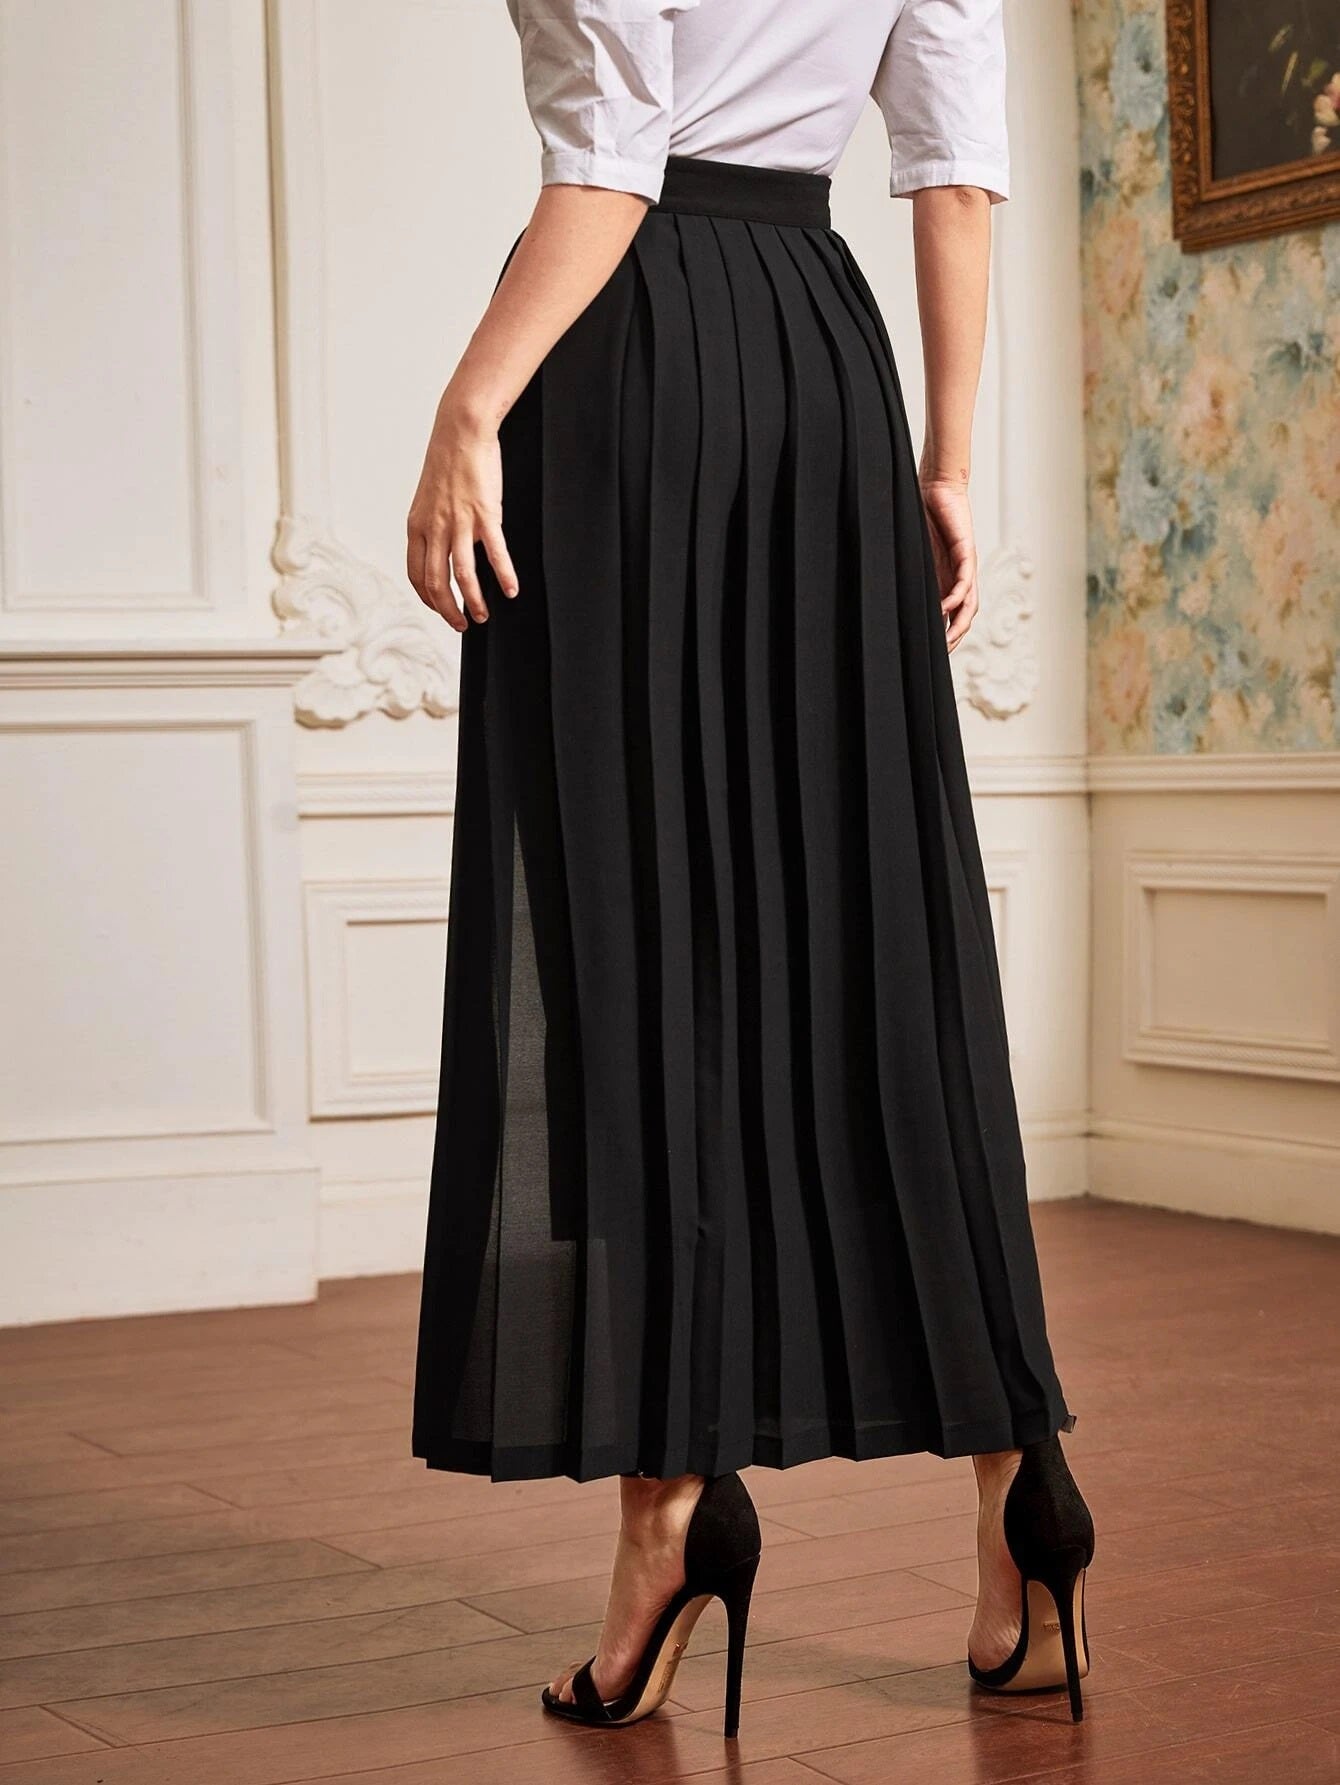 CM-BS083856 Women Elegant Seoul Style High Waist Solid Cropped Pants With Pleated Skirt